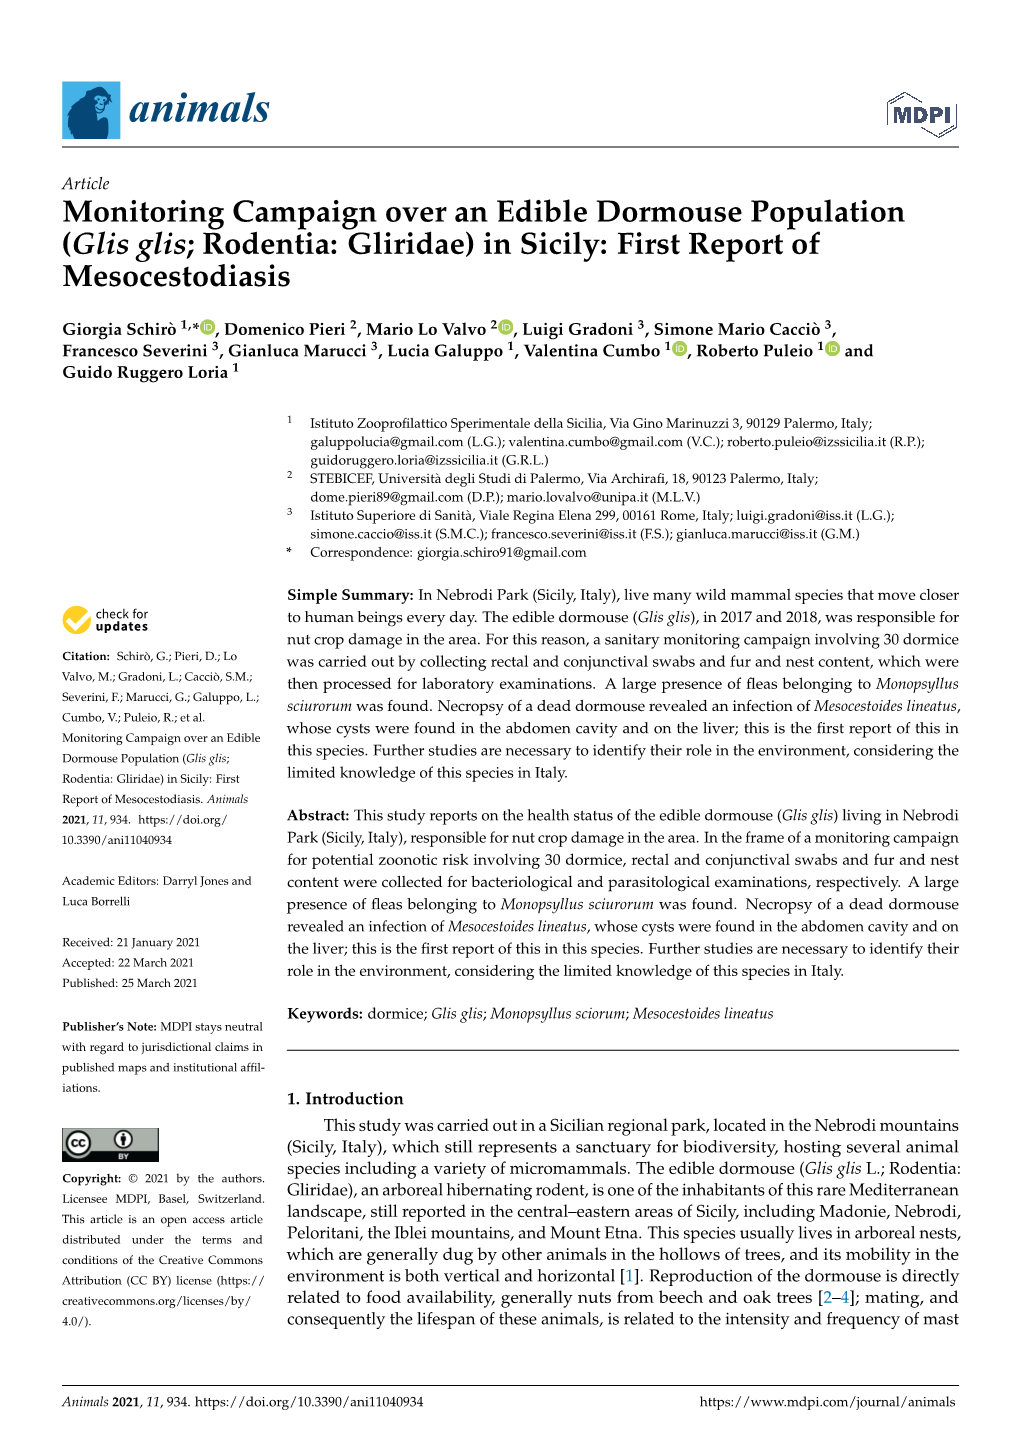 Monitoring Campaign Over an Edible Dormouse Population (Glis Glis; Rodentia: Gliridae) in Sicily: First Report of Mesocestodiasis